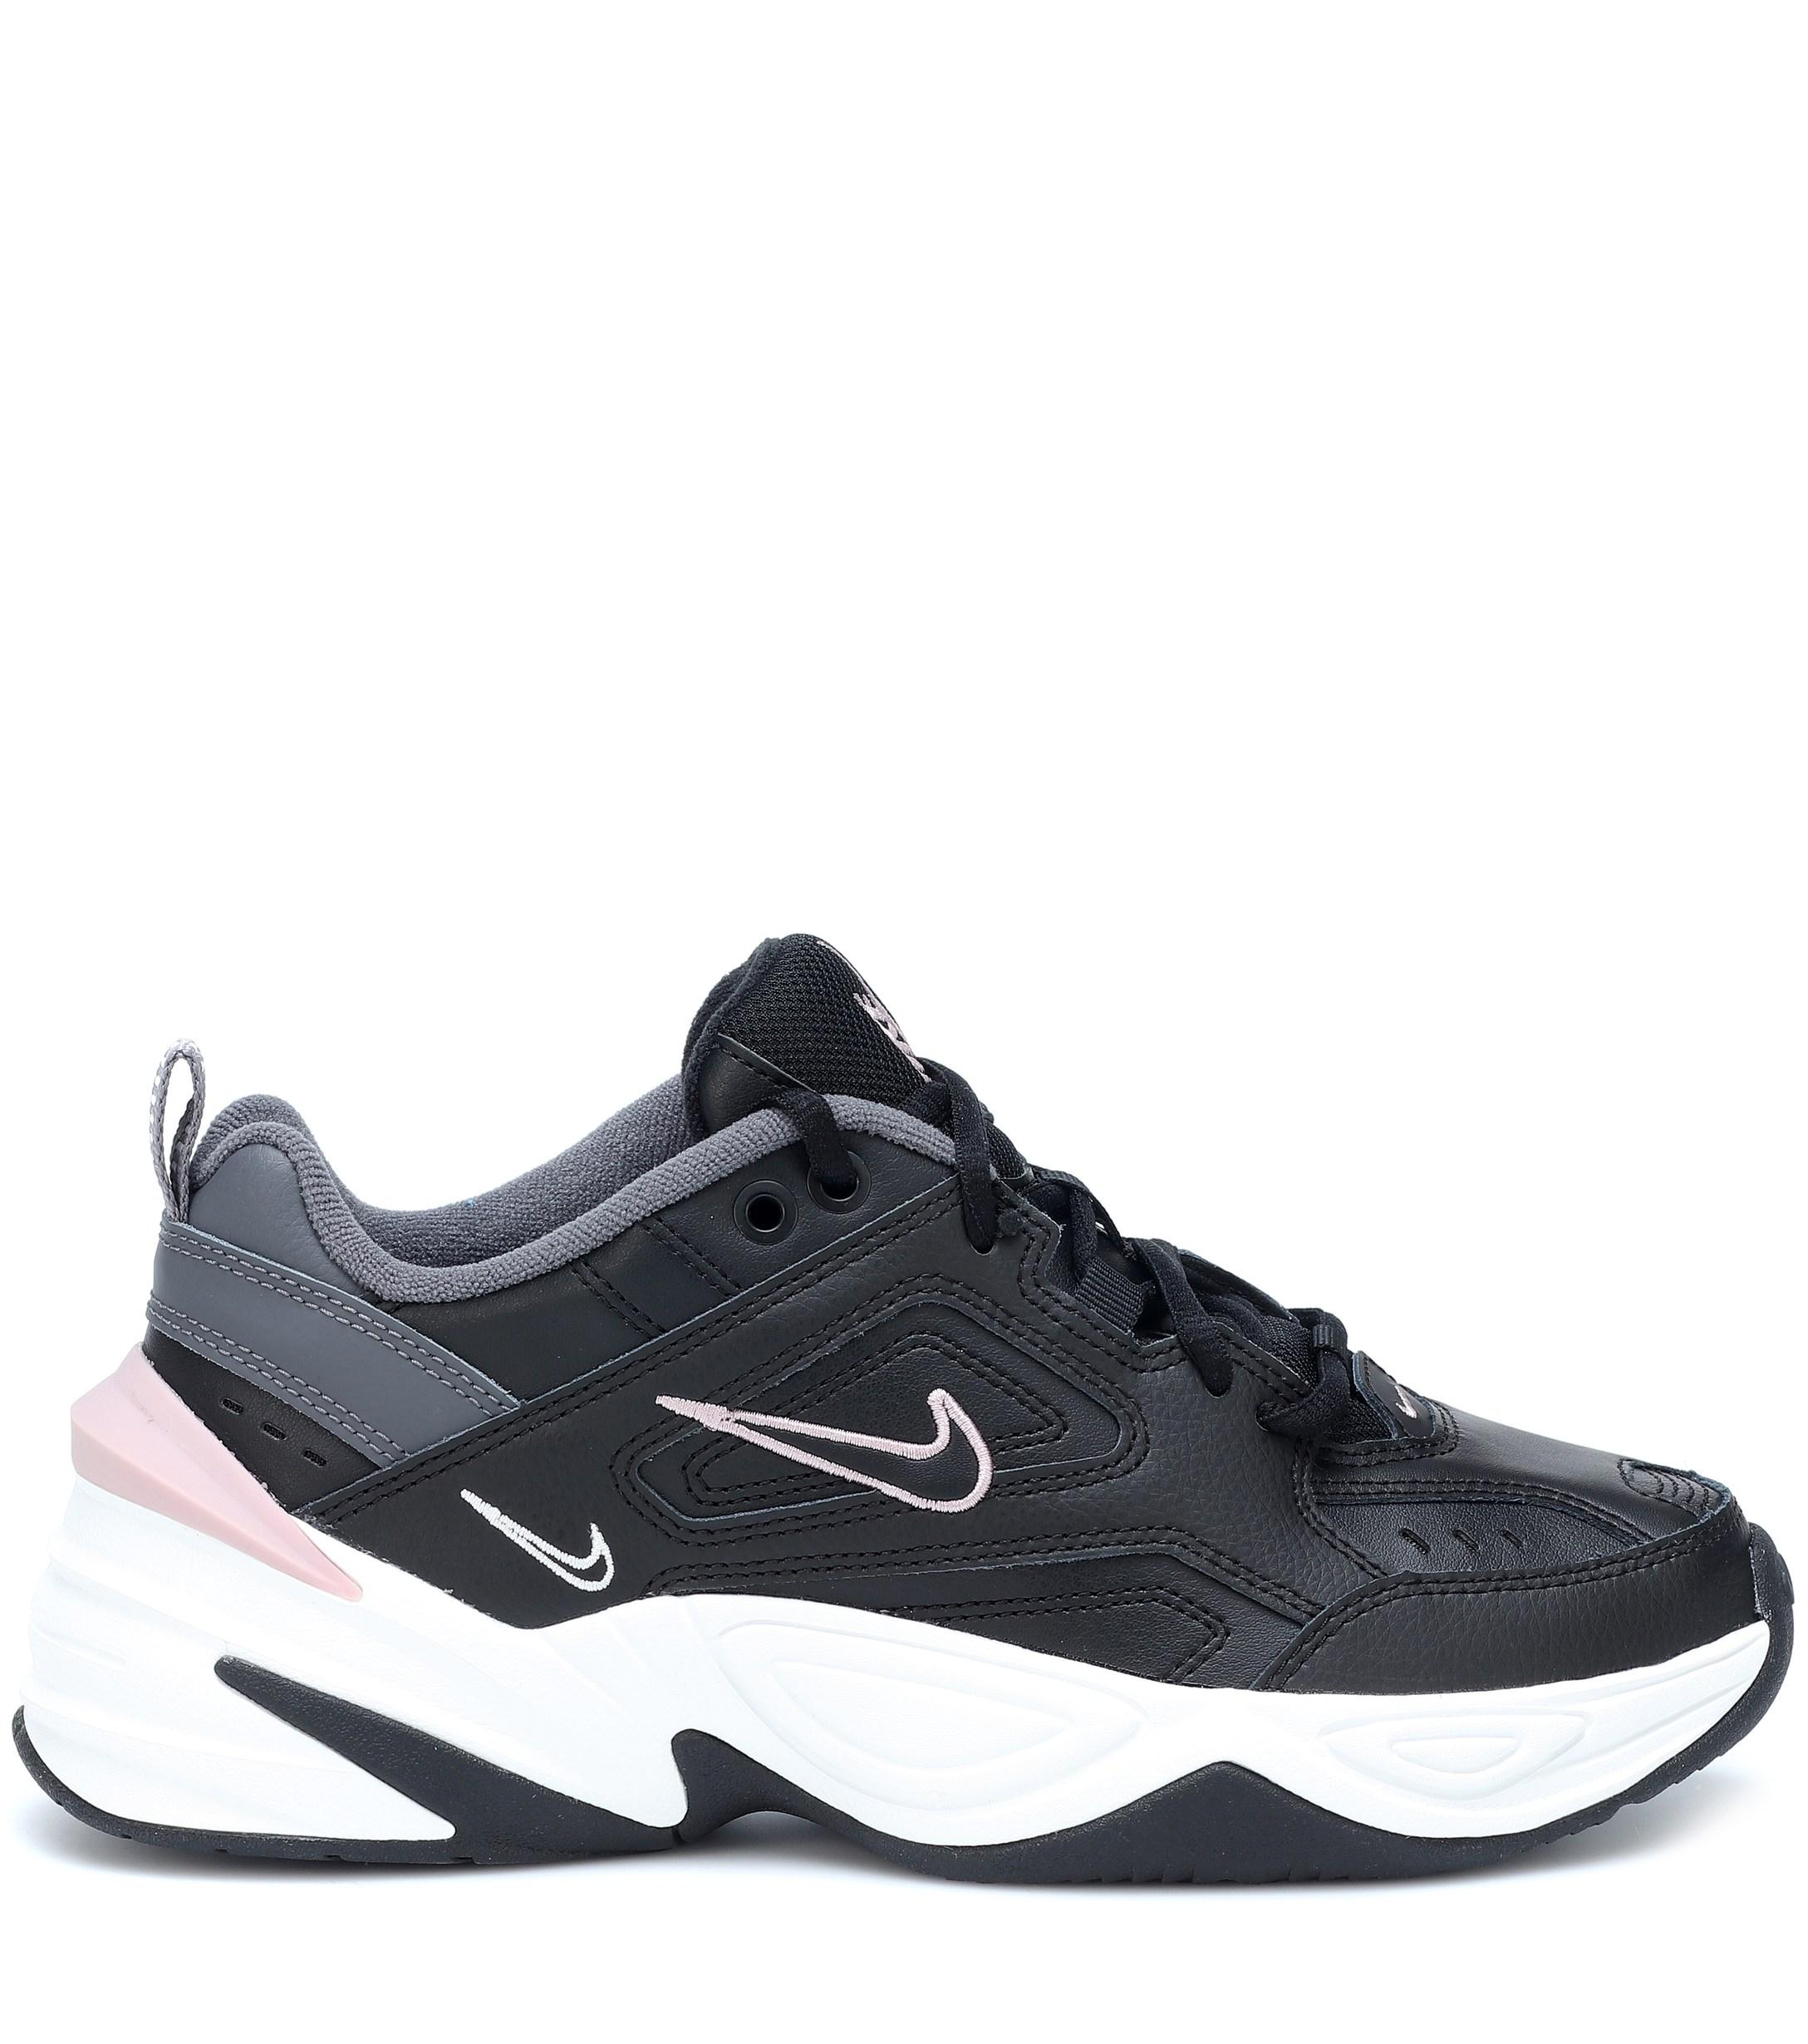 Nike M2k Tekno Personnalisable Outlet Discounts, 49% OFF |  mariaelenauseche.com